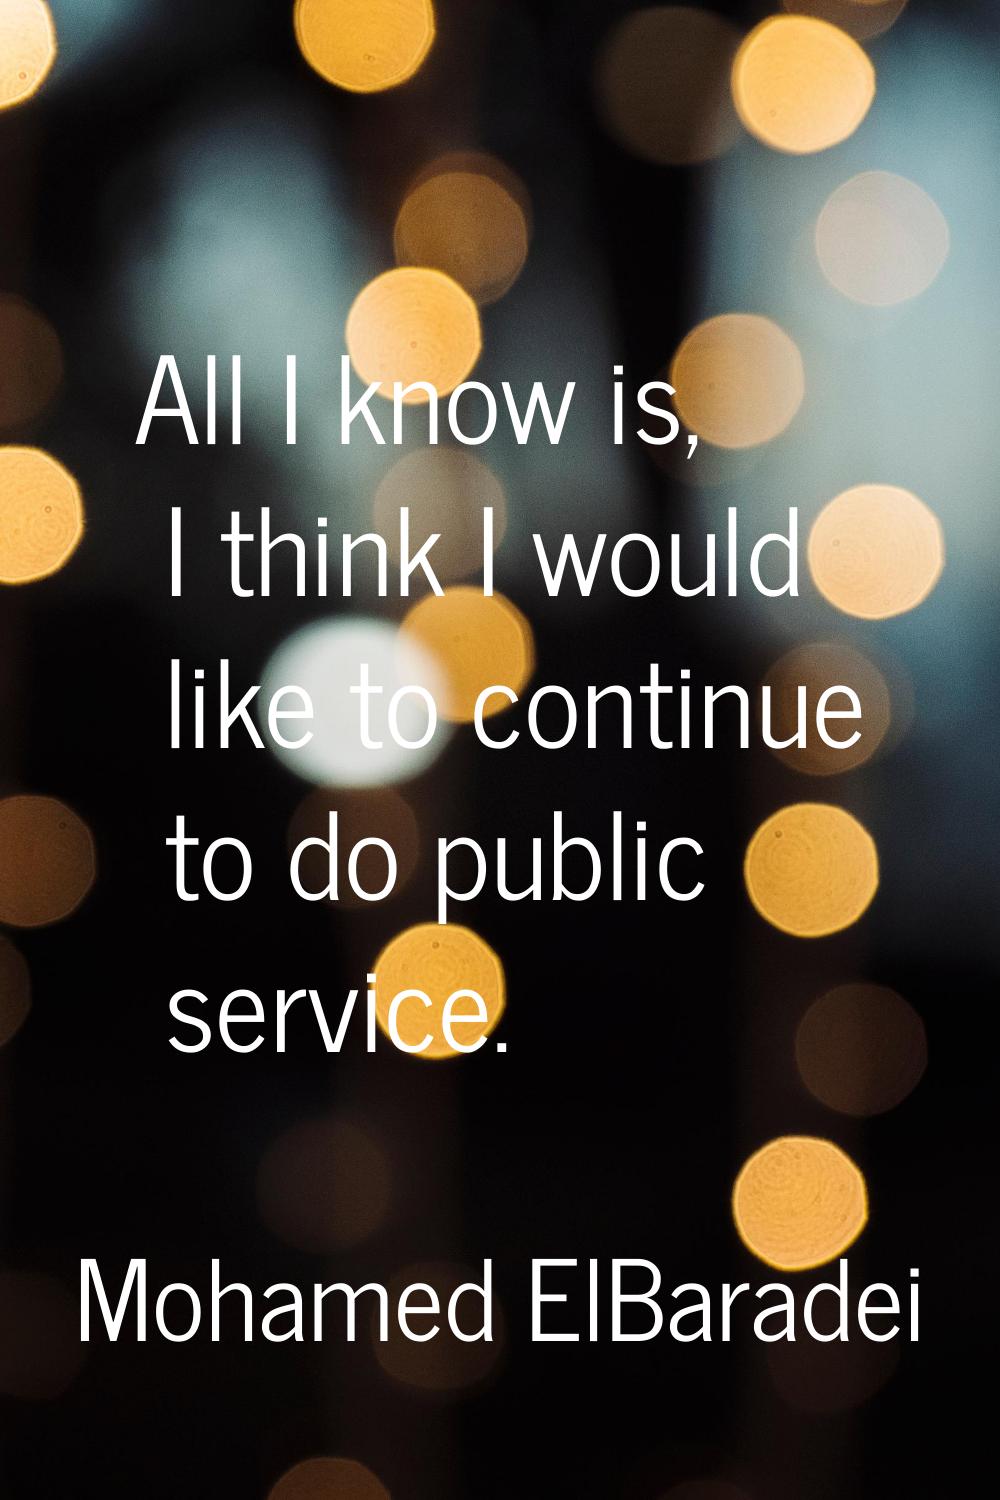 All I know is, I think I would like to continue to do public service.